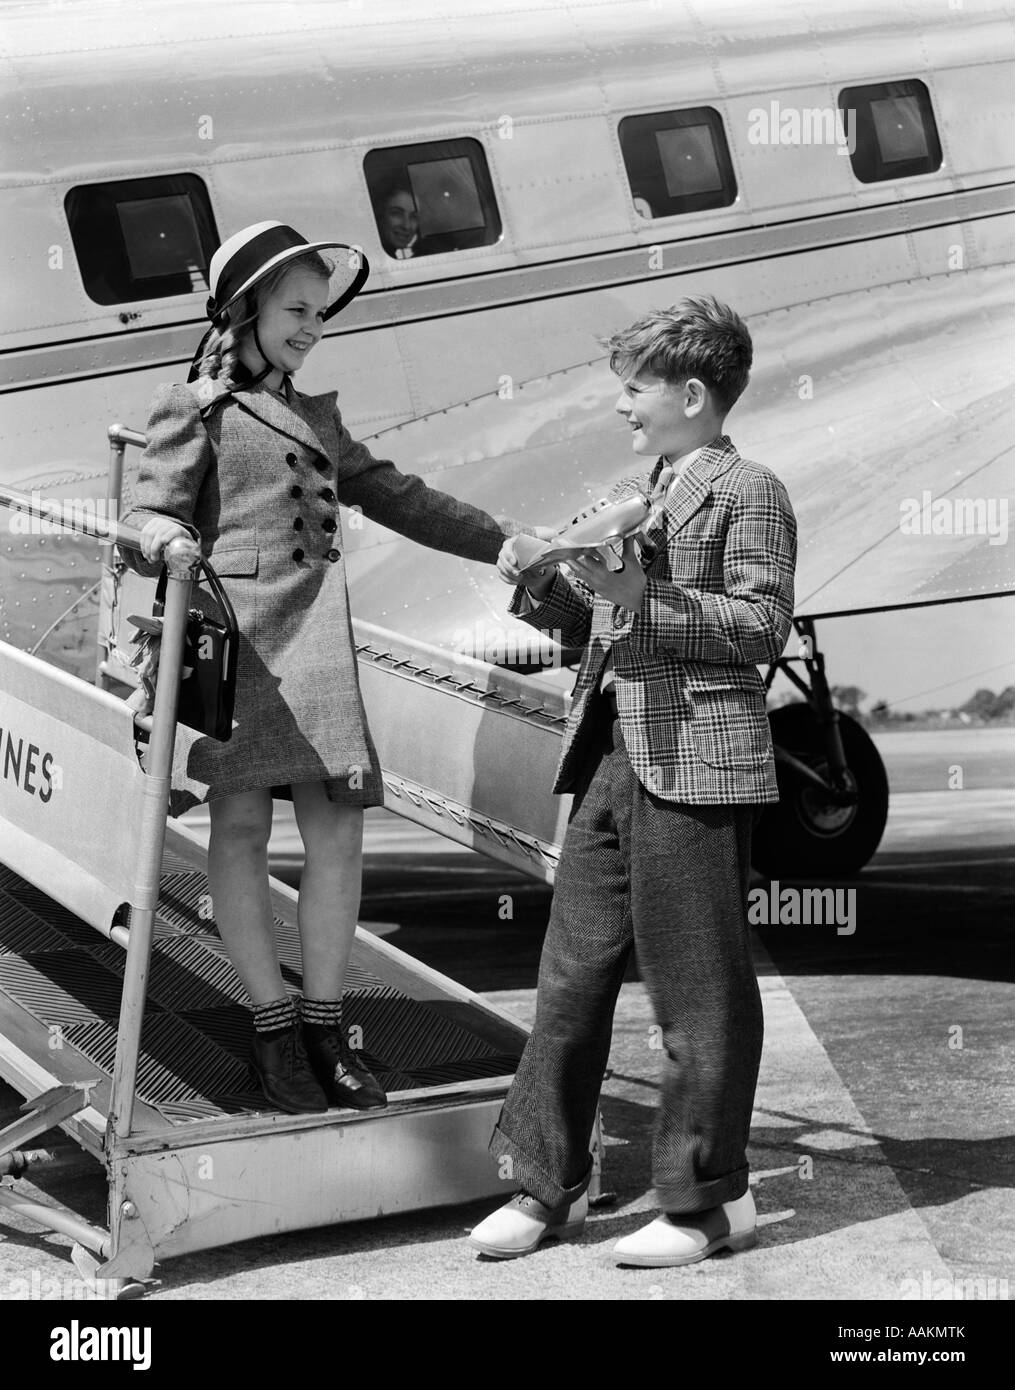 1940s BOY GIRL WALKING OFF BOARDING RAMP OF AIRPLANE BOY HOLDS TOY PLANE DRESS FASHION SUIT TIE Stock Photo